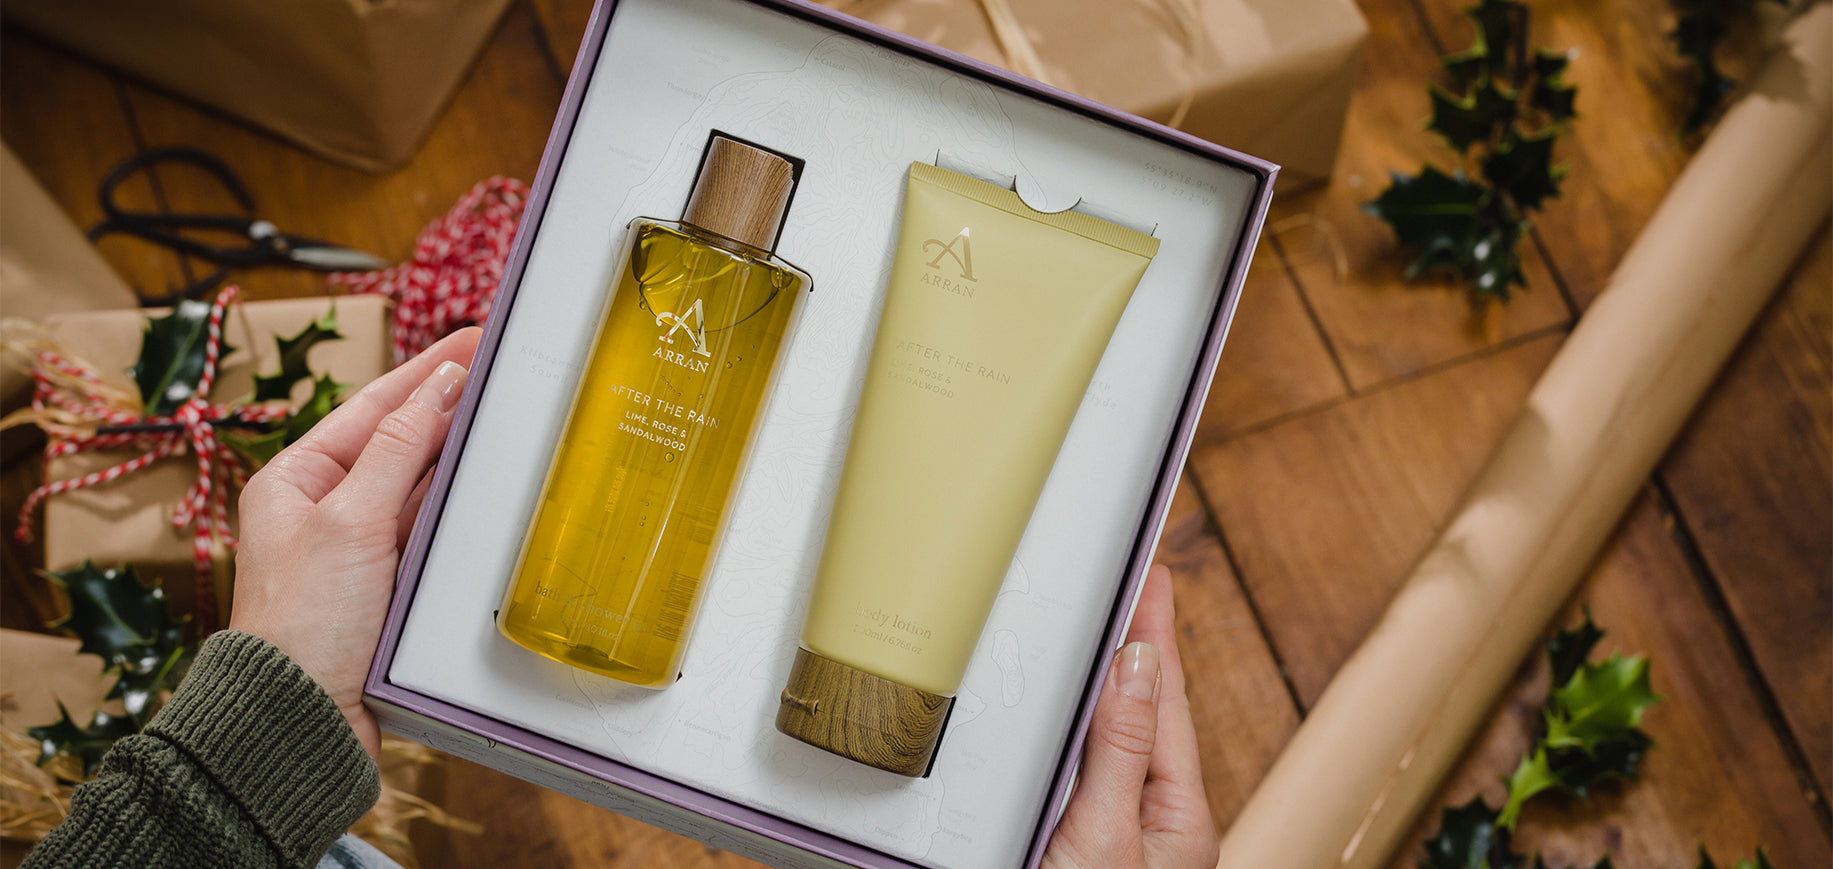 After the Rain Body Care Gift Set with Shower Gel and Body Lotion in gift box